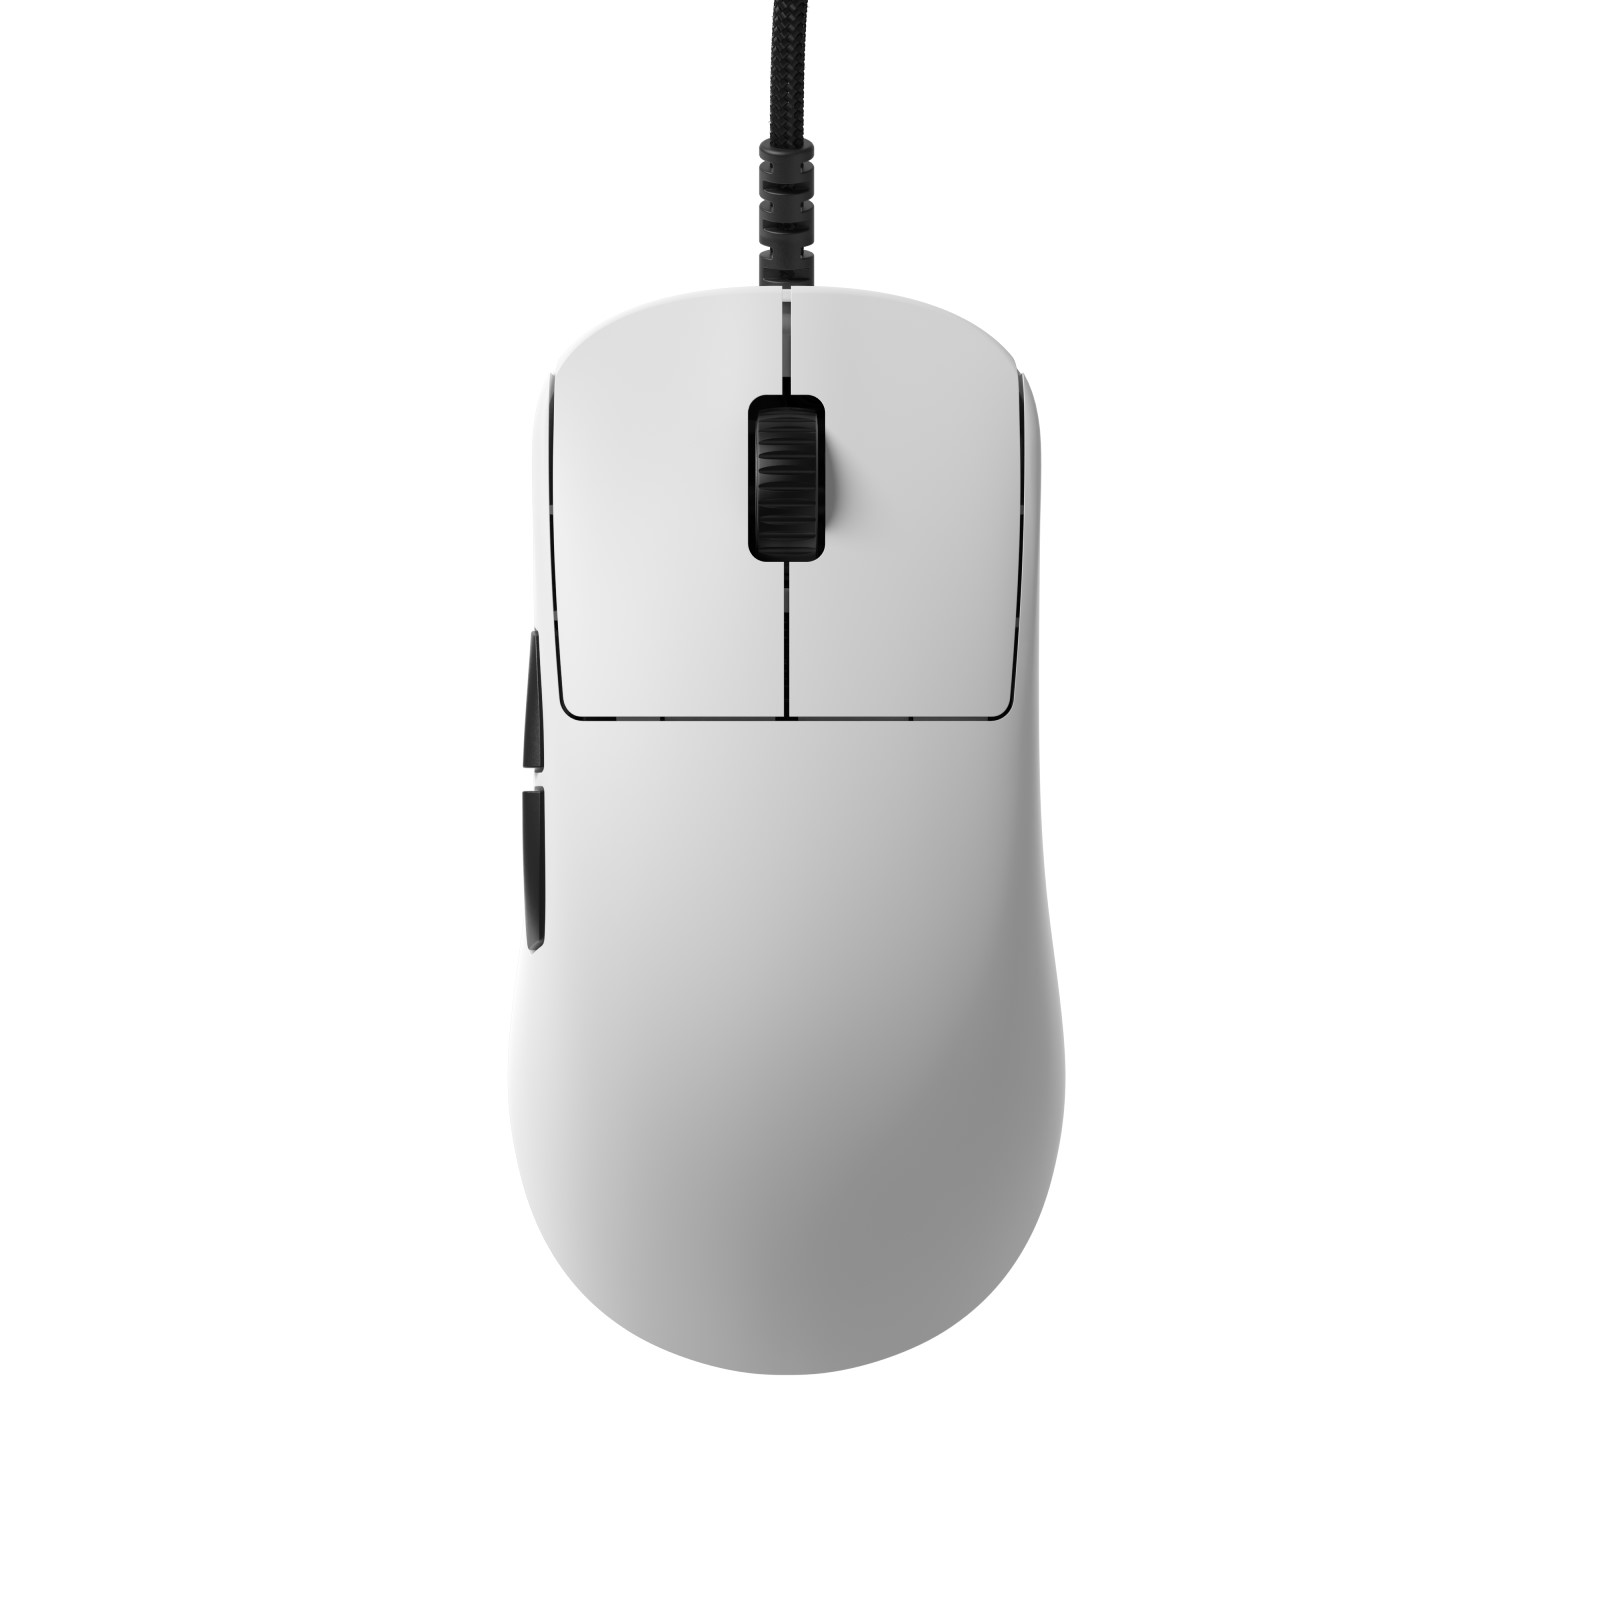 Endgame Gear OP1 8K Gaming Mouse White